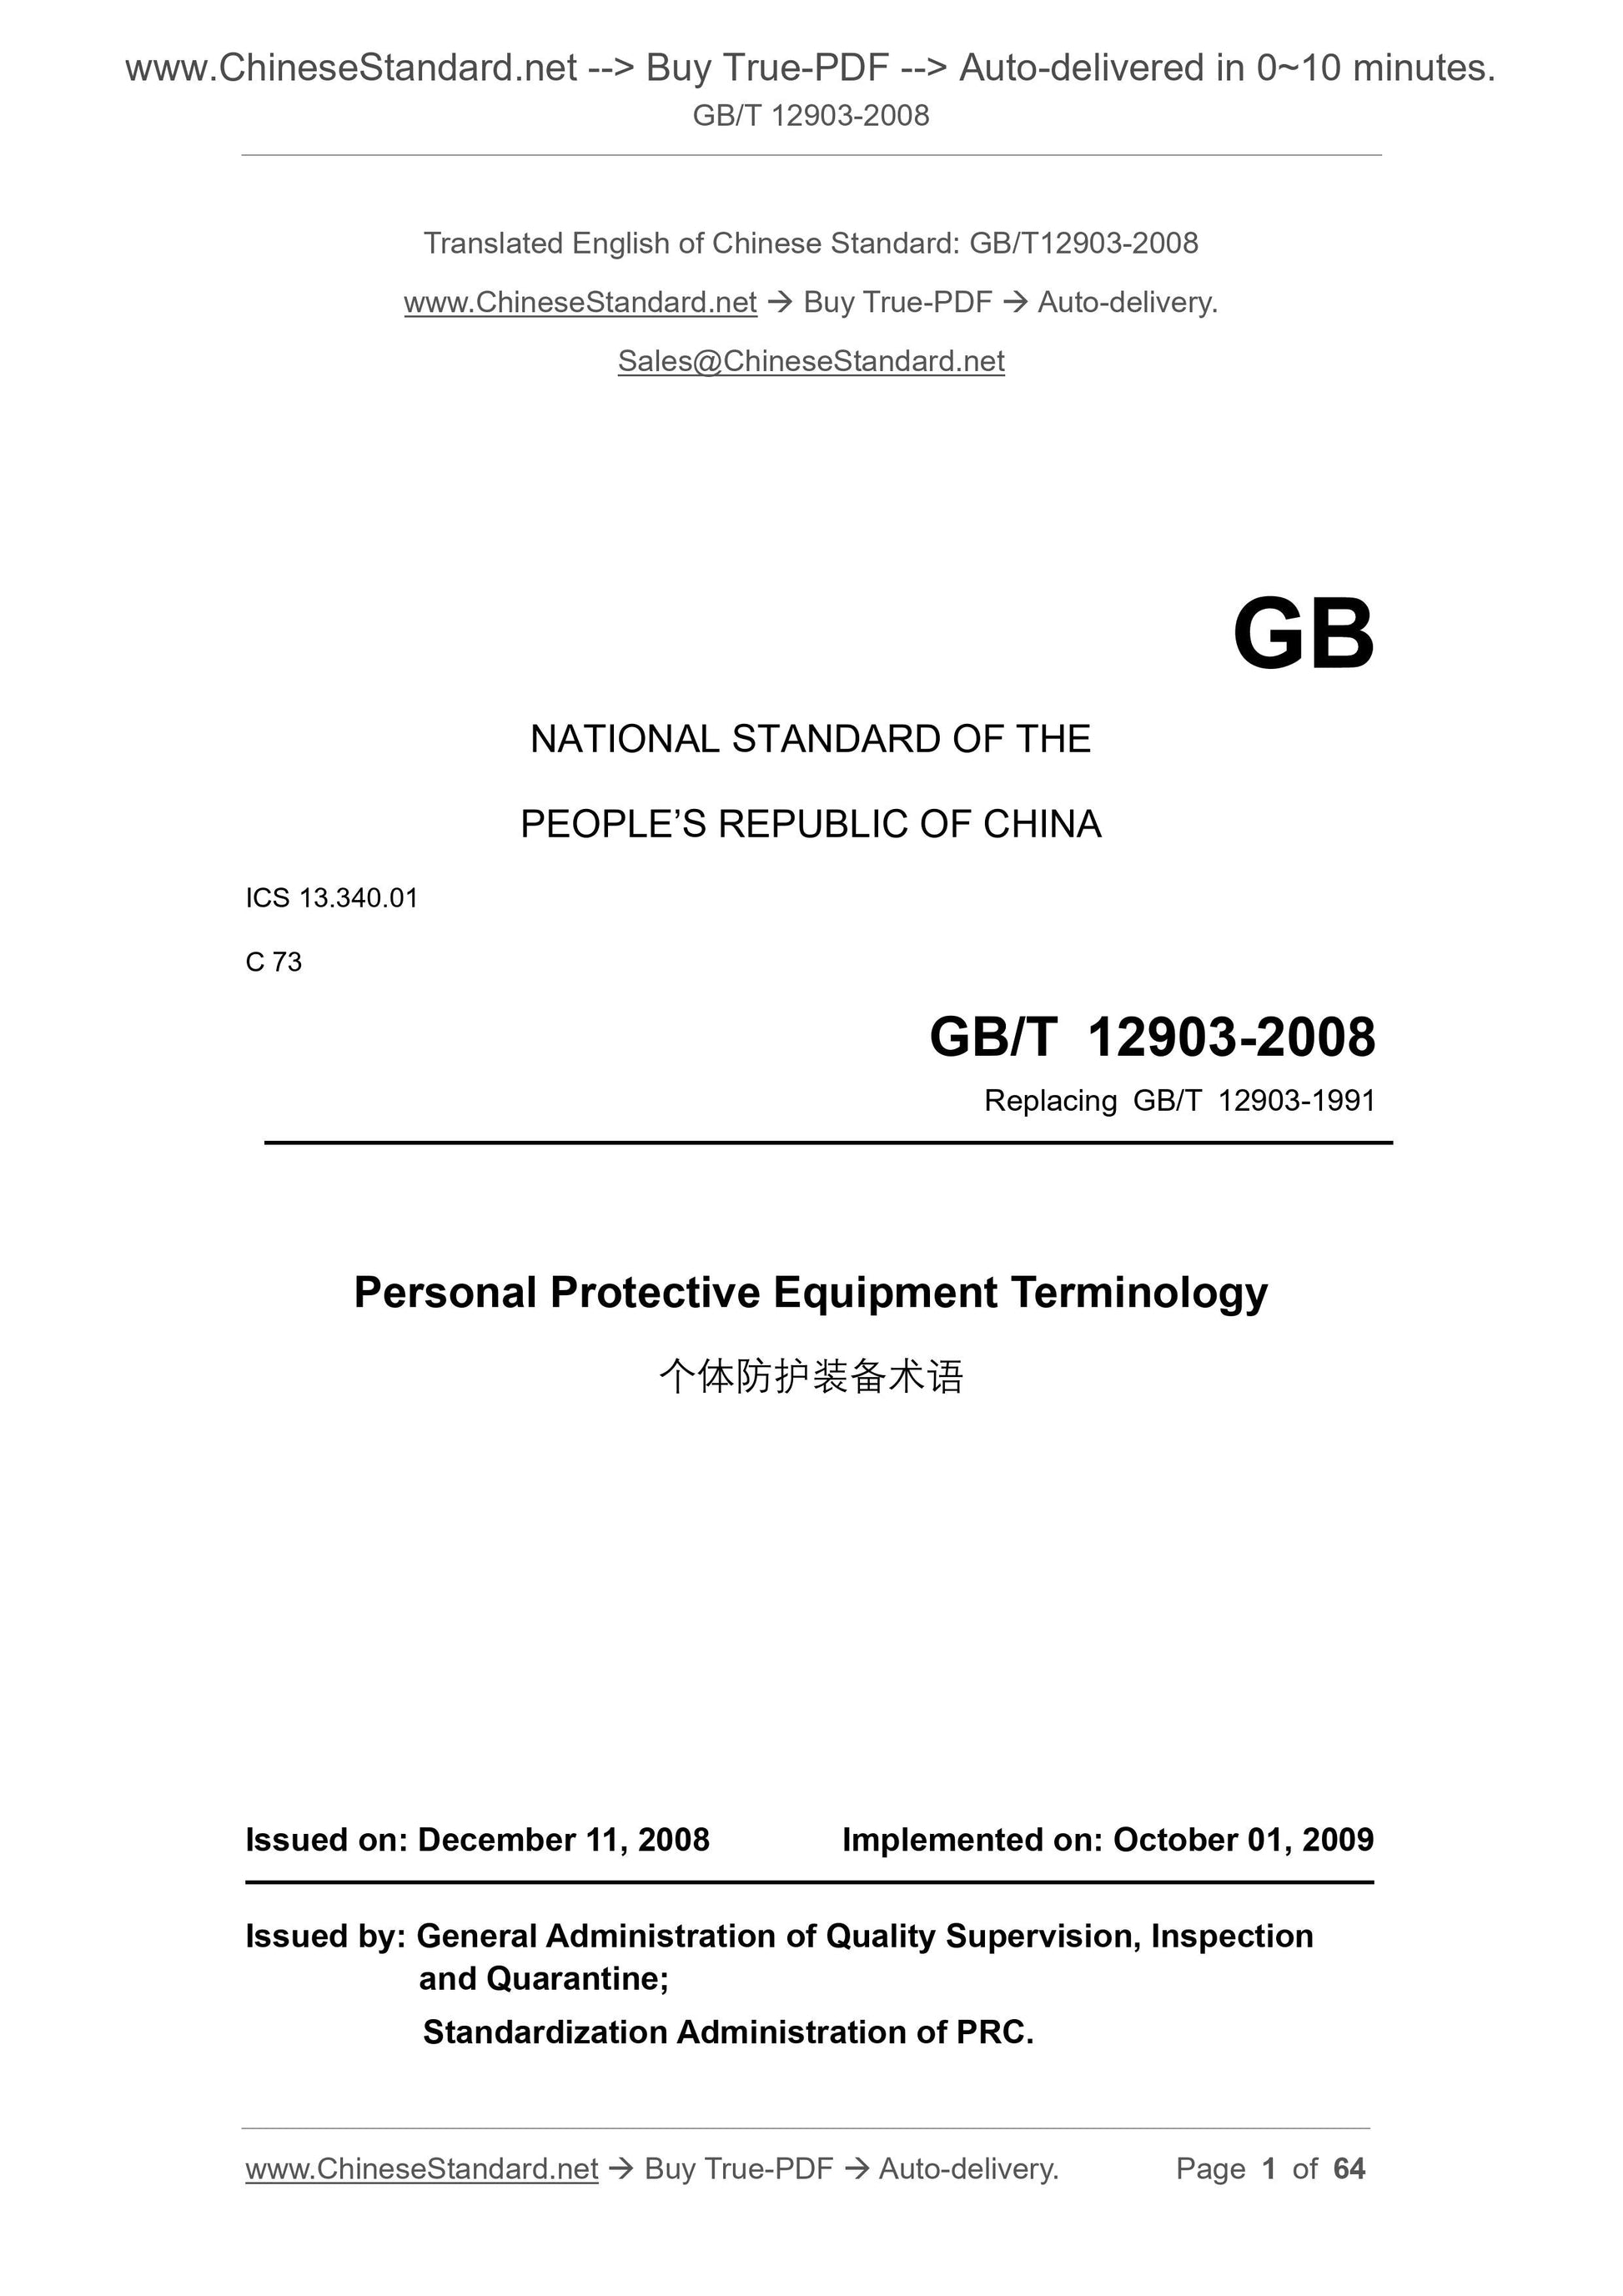 GB/T 12903-2008 Page 1